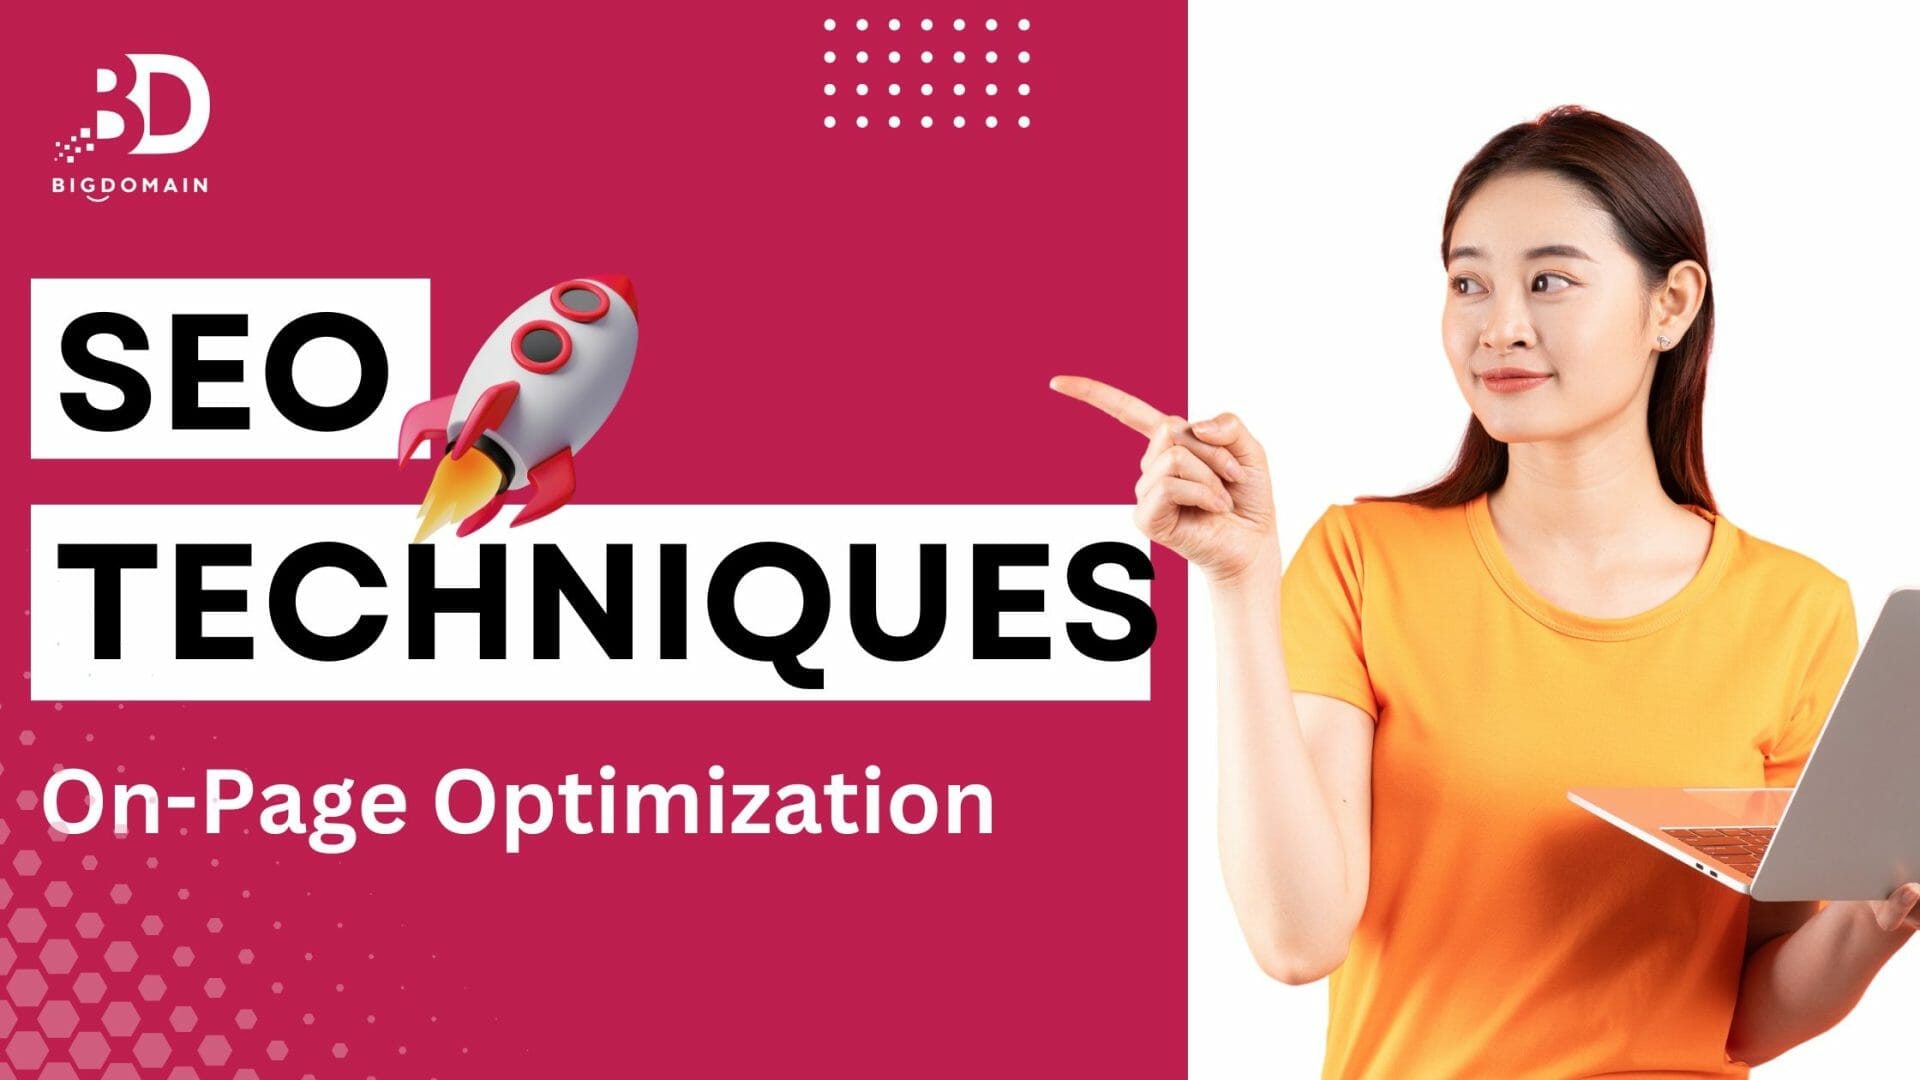 SEO Techniques On-Page Optimization